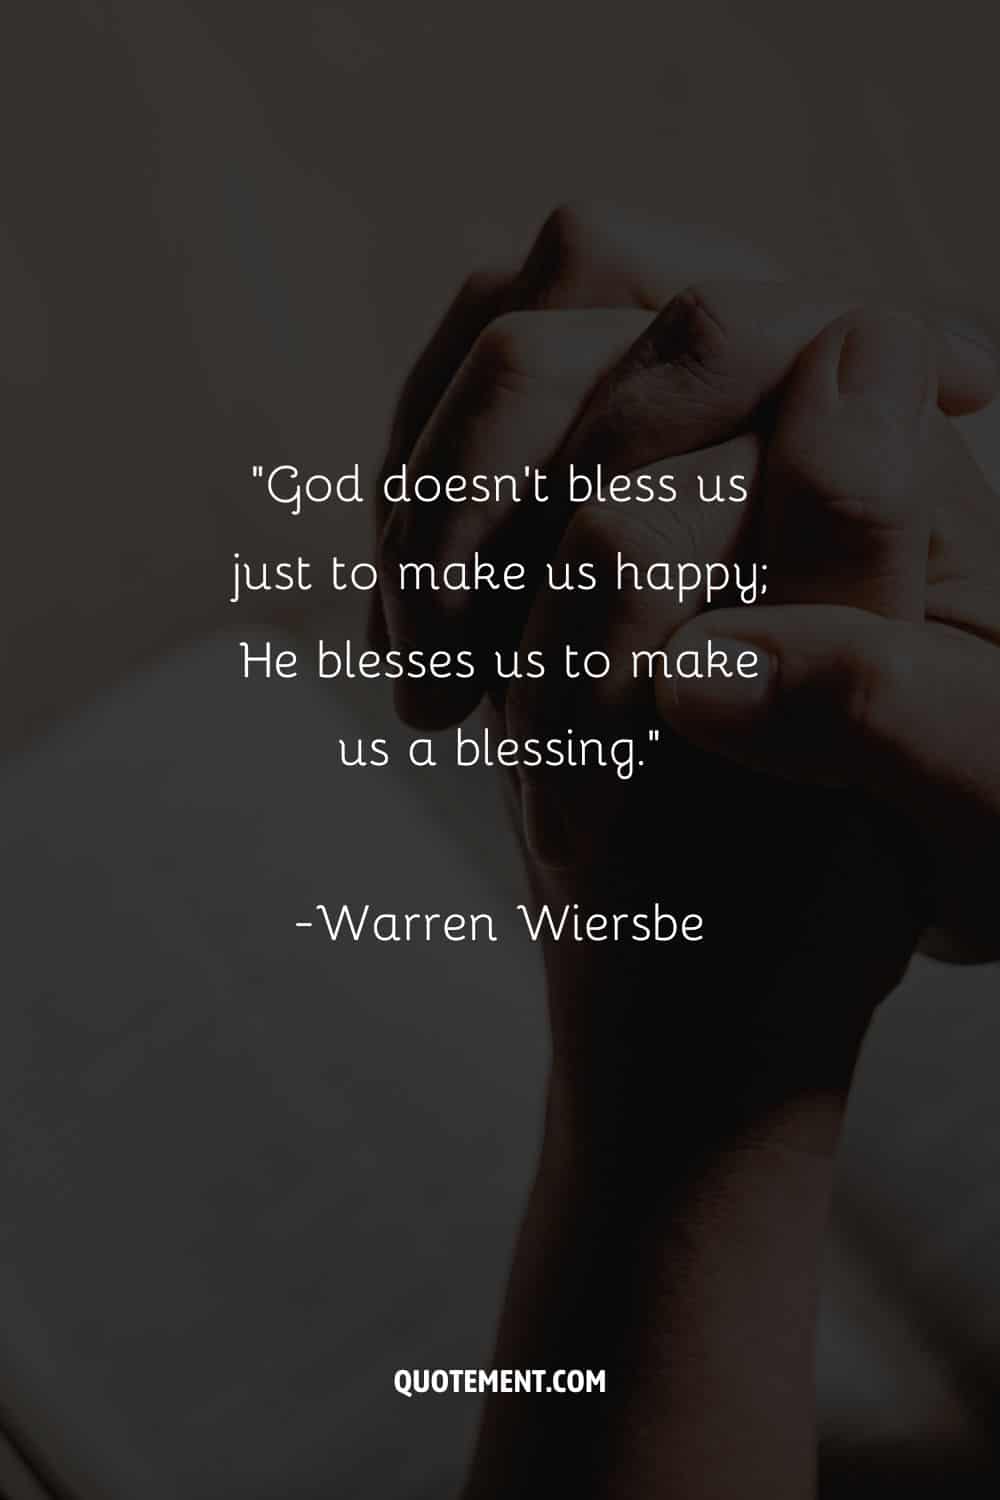 God doesn't bless us just to make us happy; He blesses us to make us a blessing.